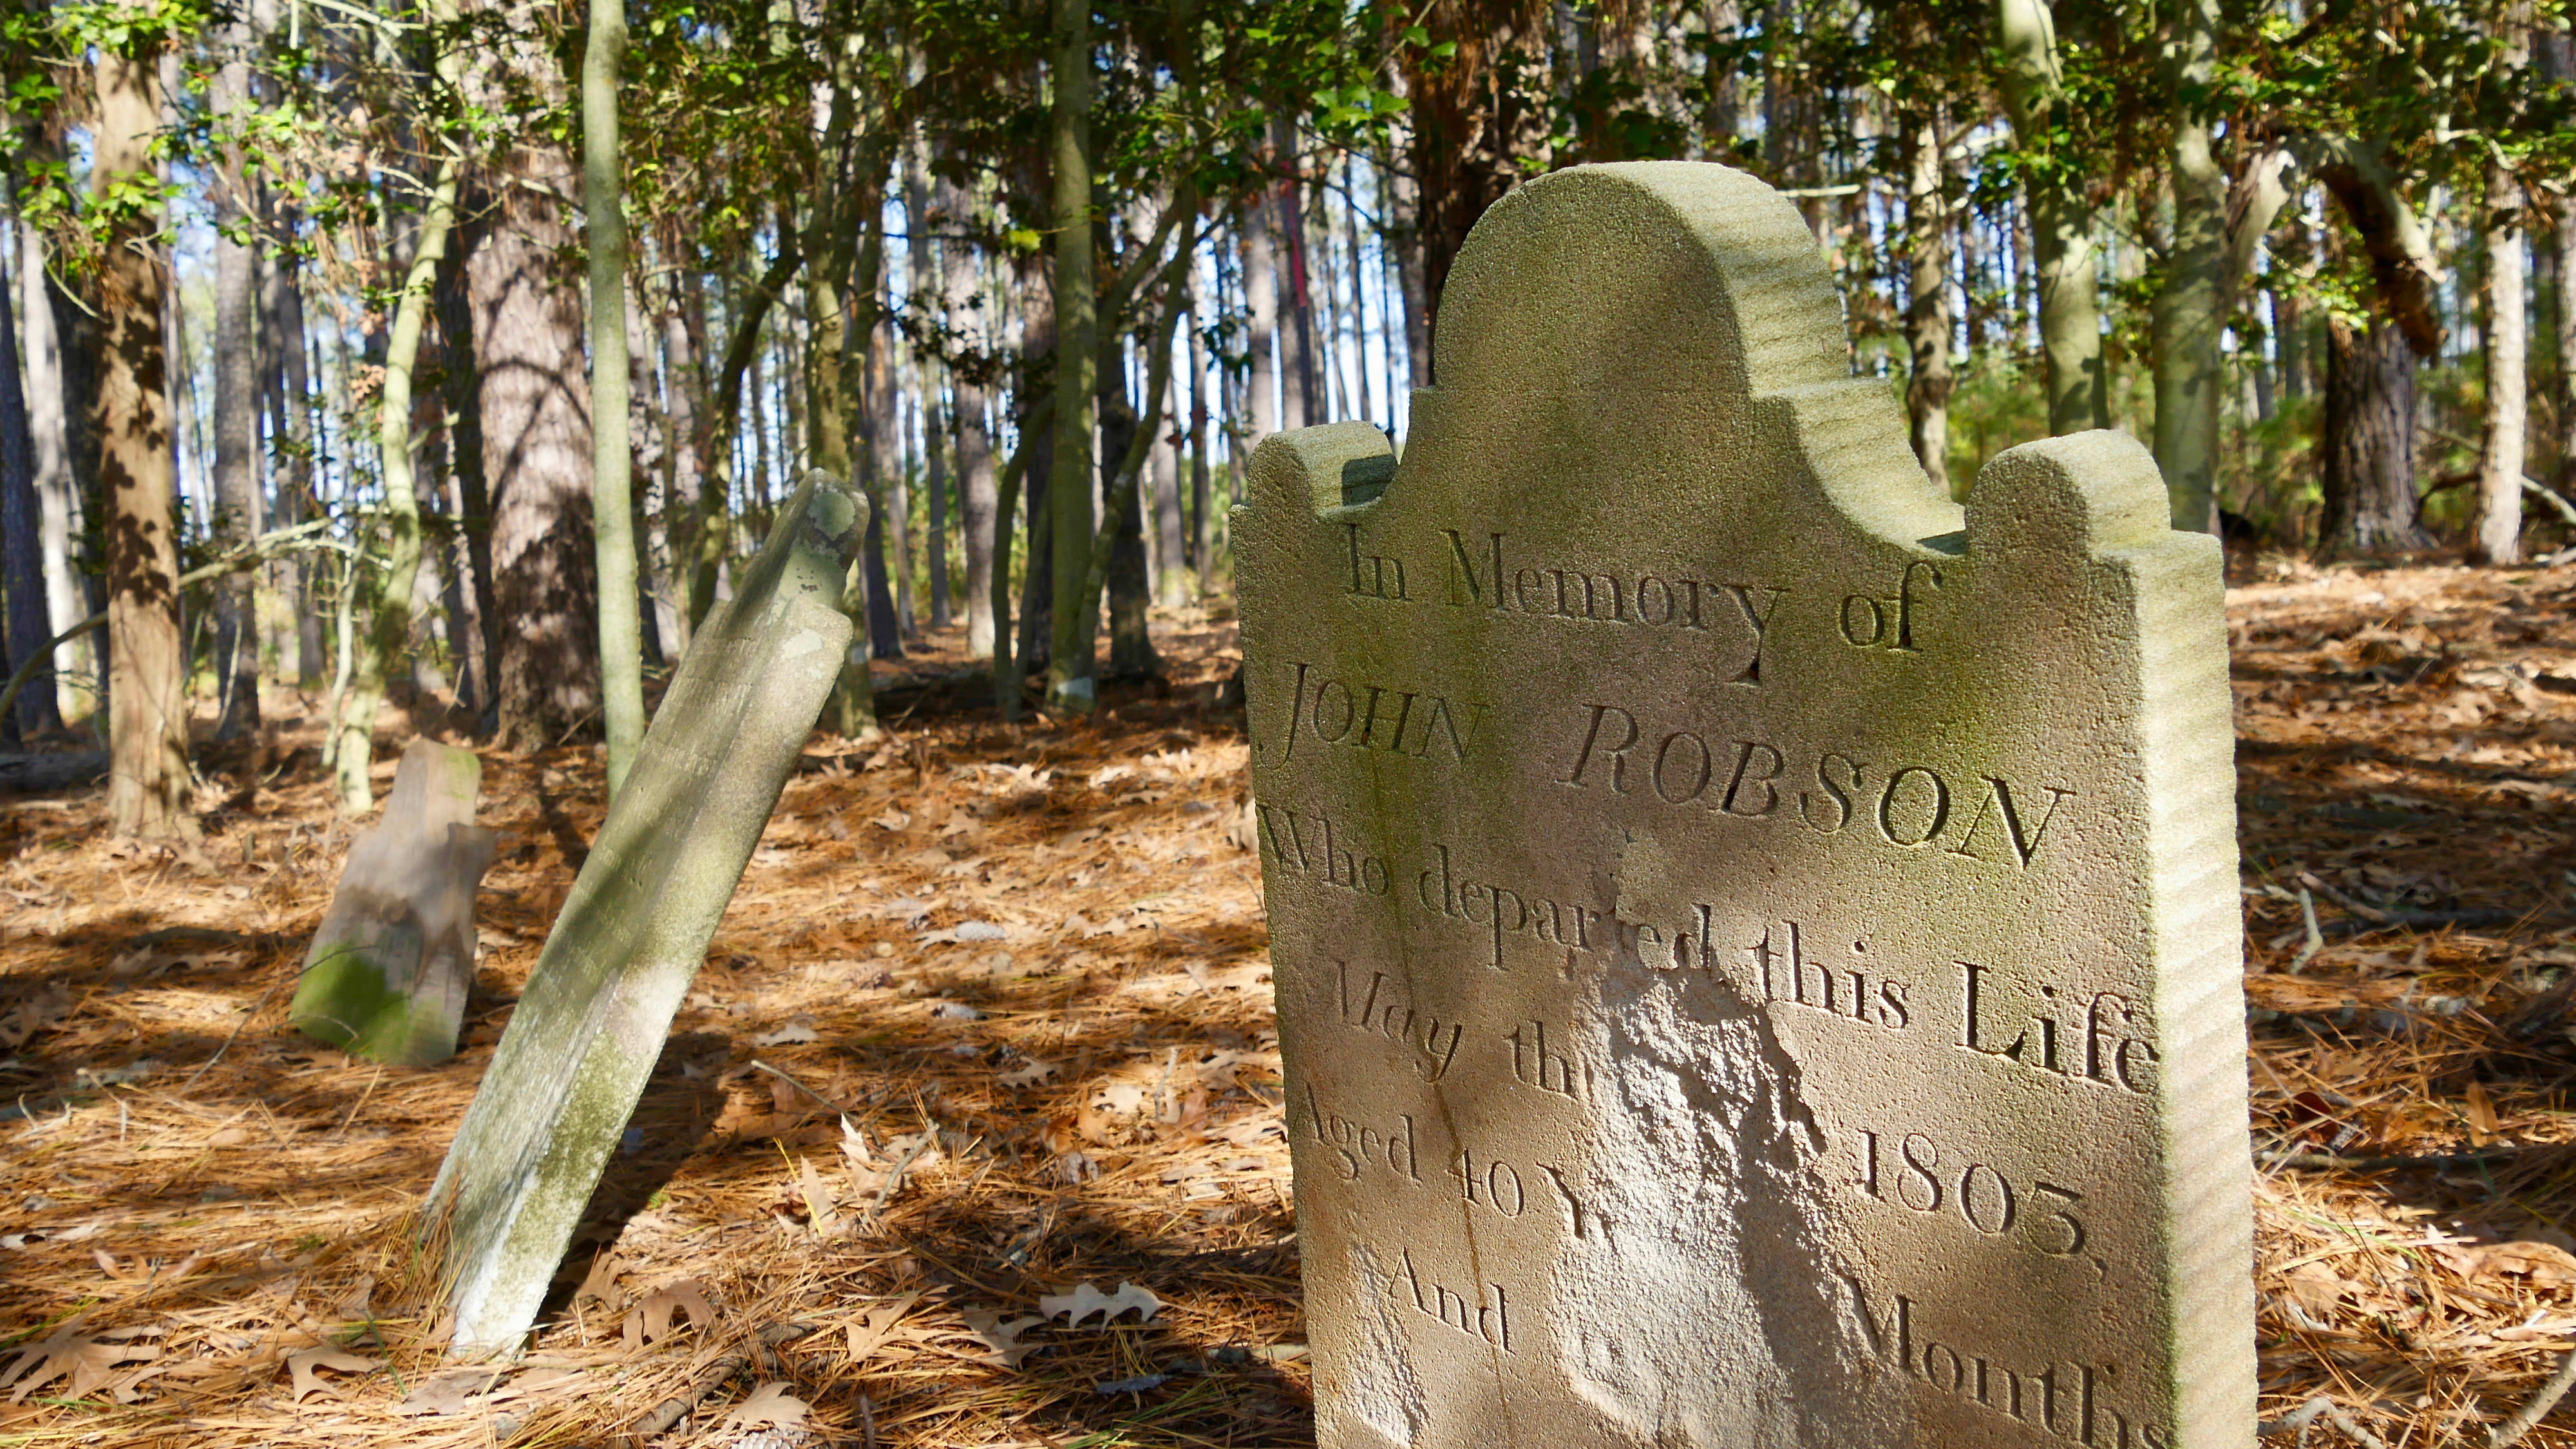 Three headstone sit in a row in a clearing covered in pine needles. The marker in the foreground has a large gap on its face where the stone has weathered away.